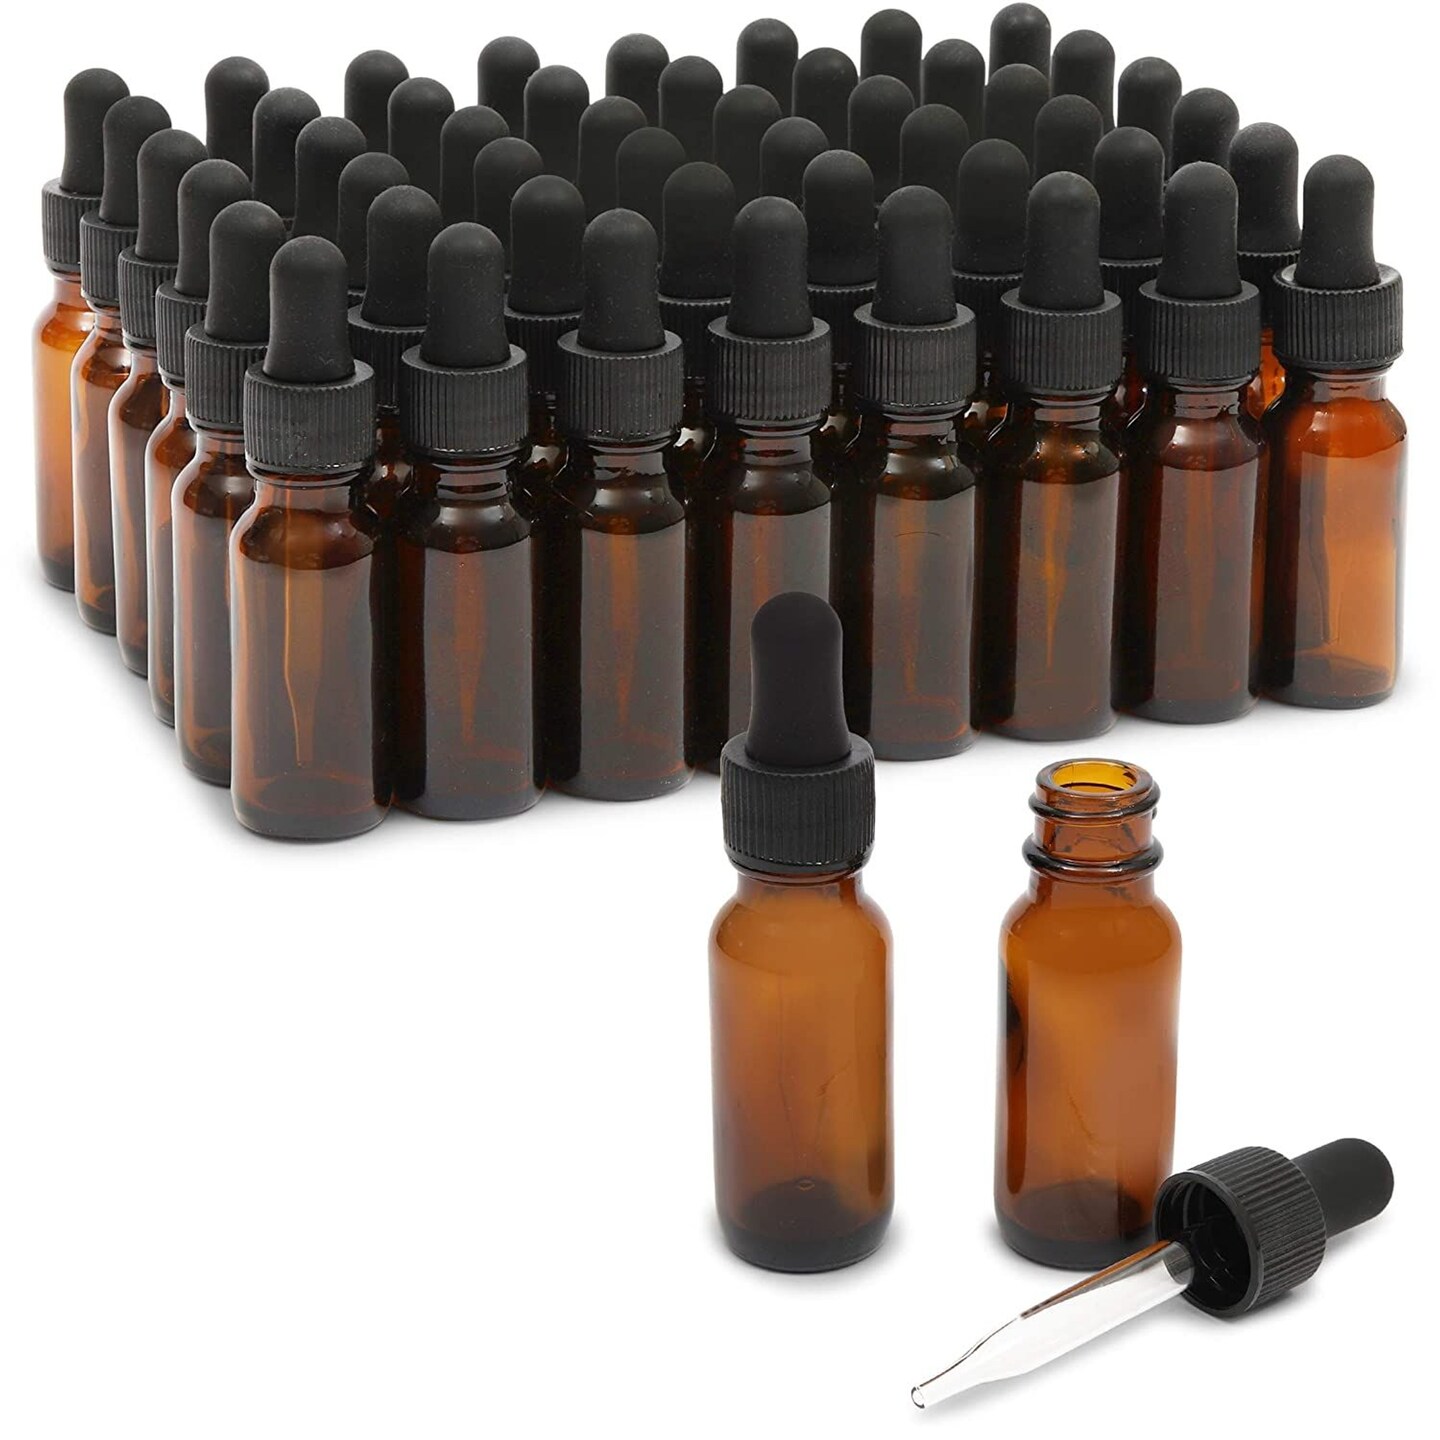 48 Count 1 oz Amber Glass Dropper Bottles and 6 Funnels for Essential Oils and Perfumes (30 ml, 54 Pieces)